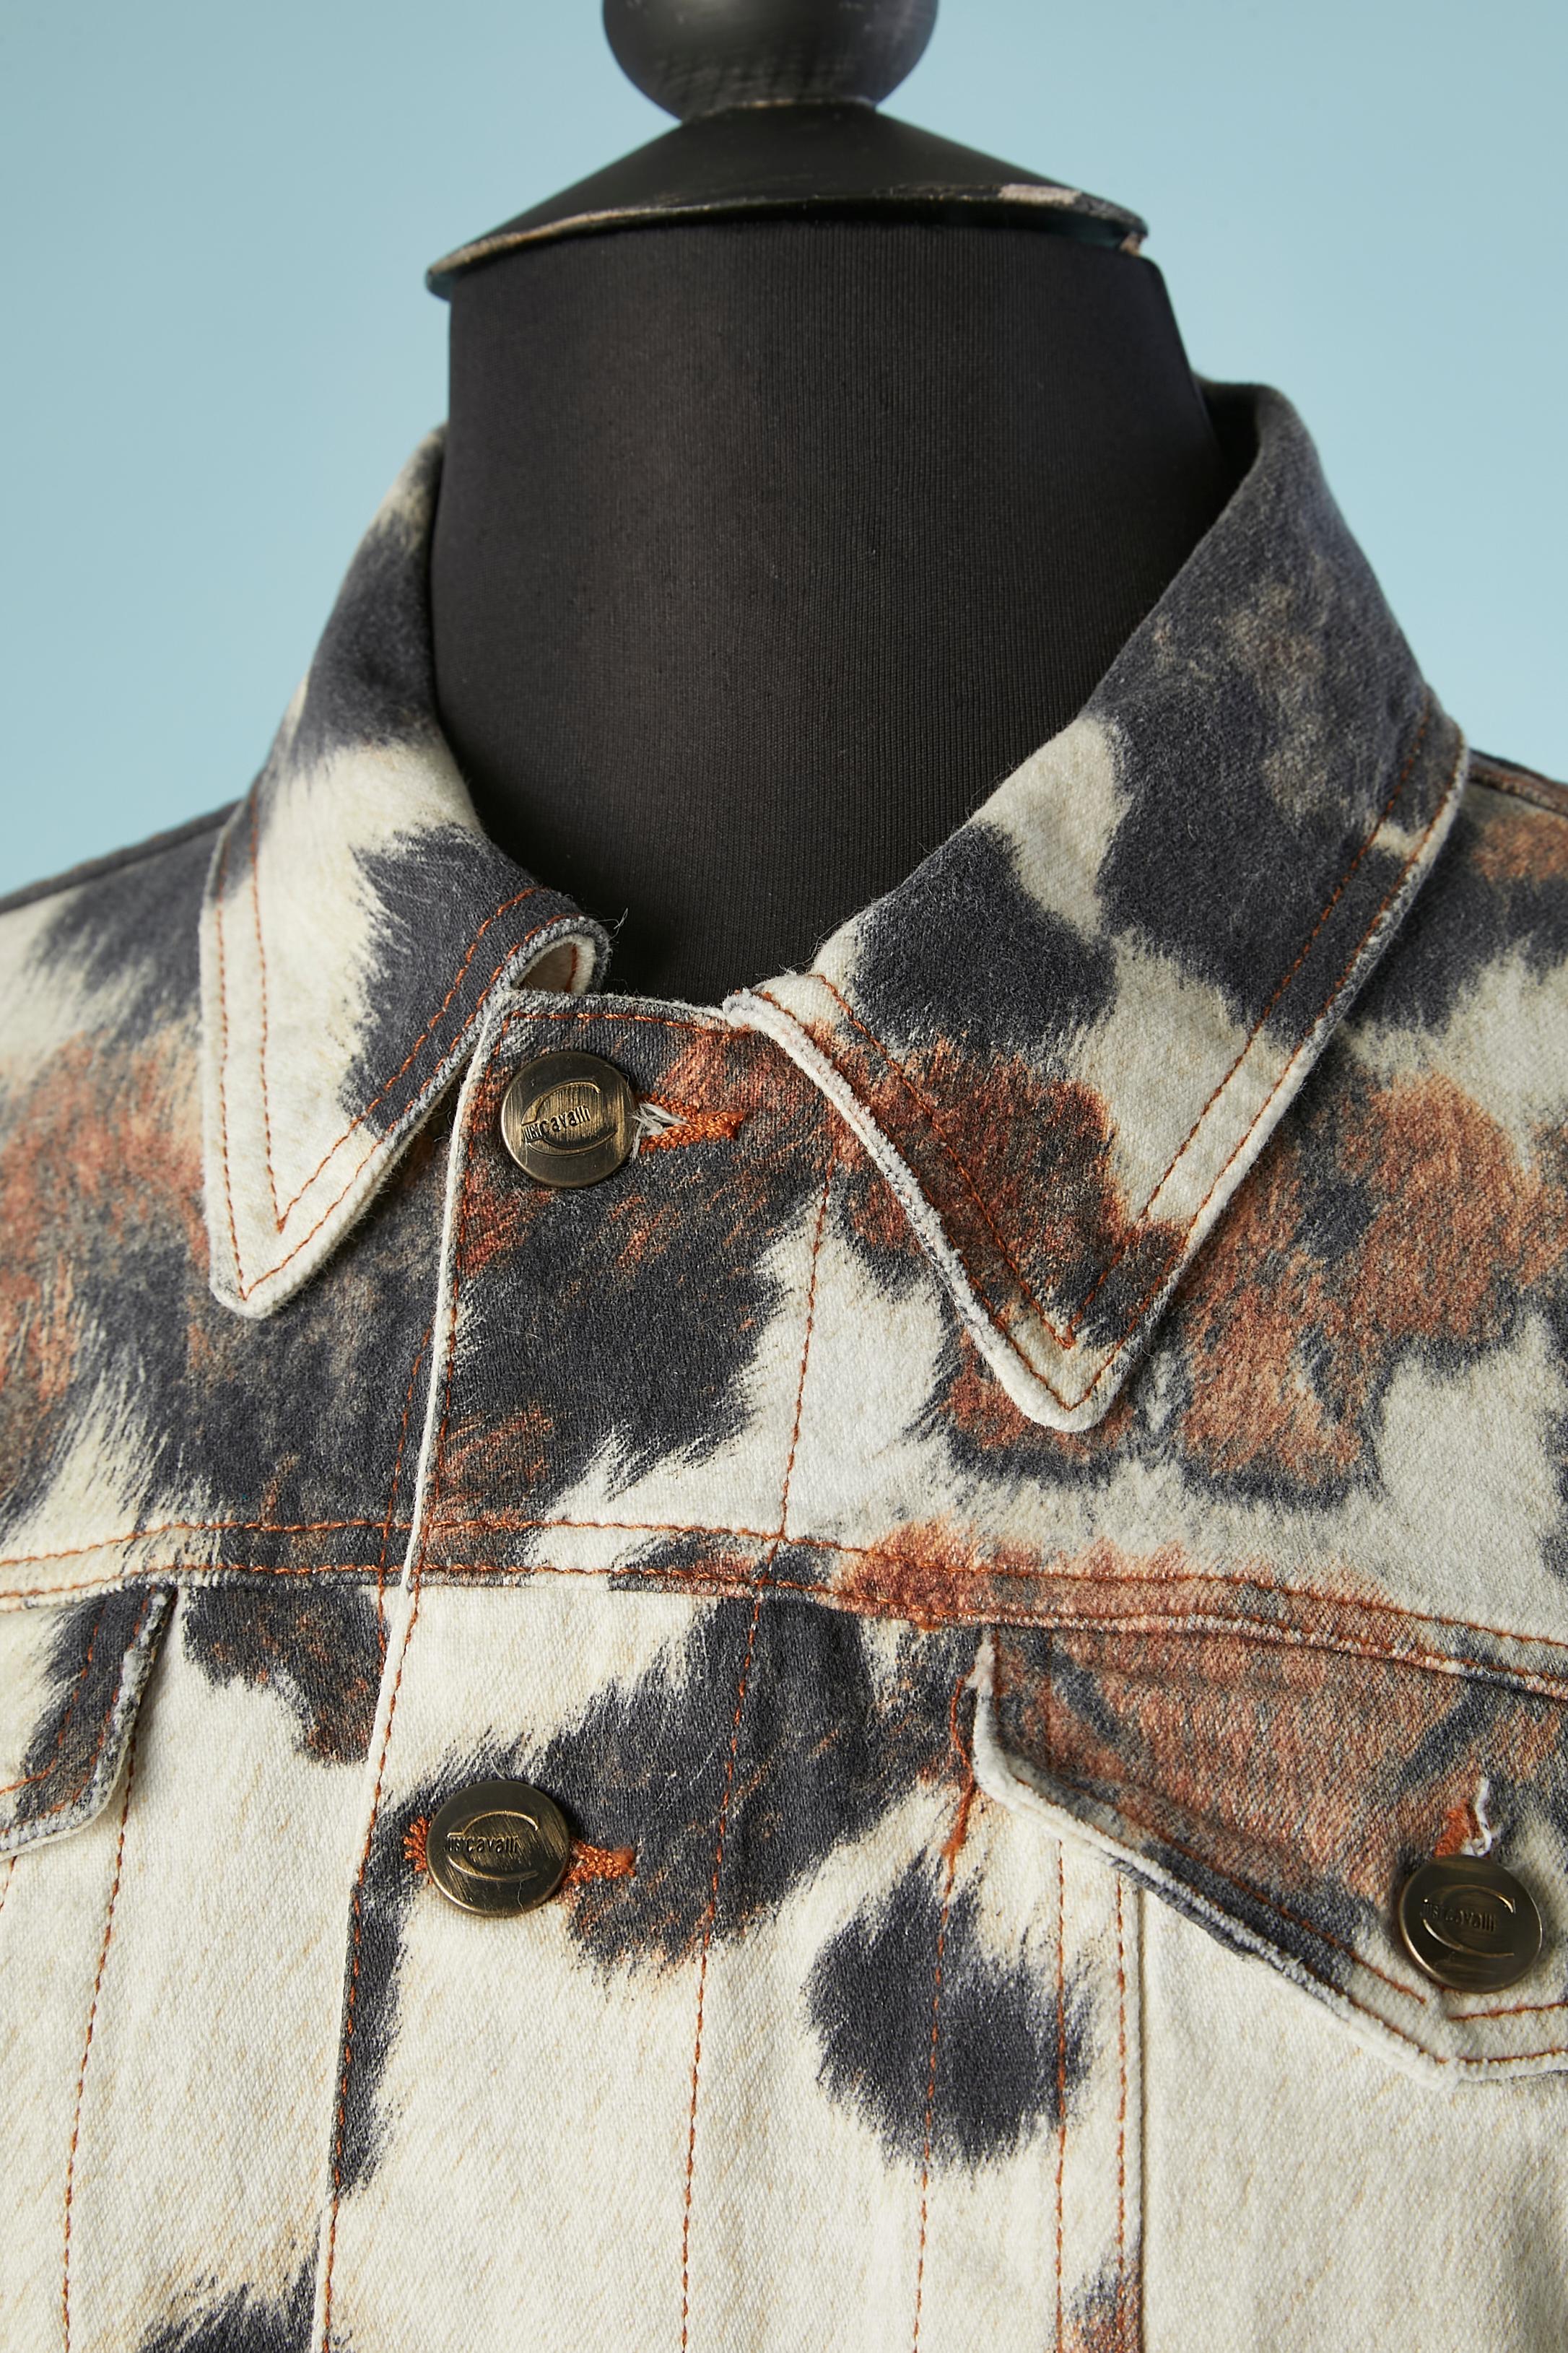 Printed cotton jacket with branded fabric and buttons.Fabric composition: 99% cotton, 1% other fiber

SIZE L